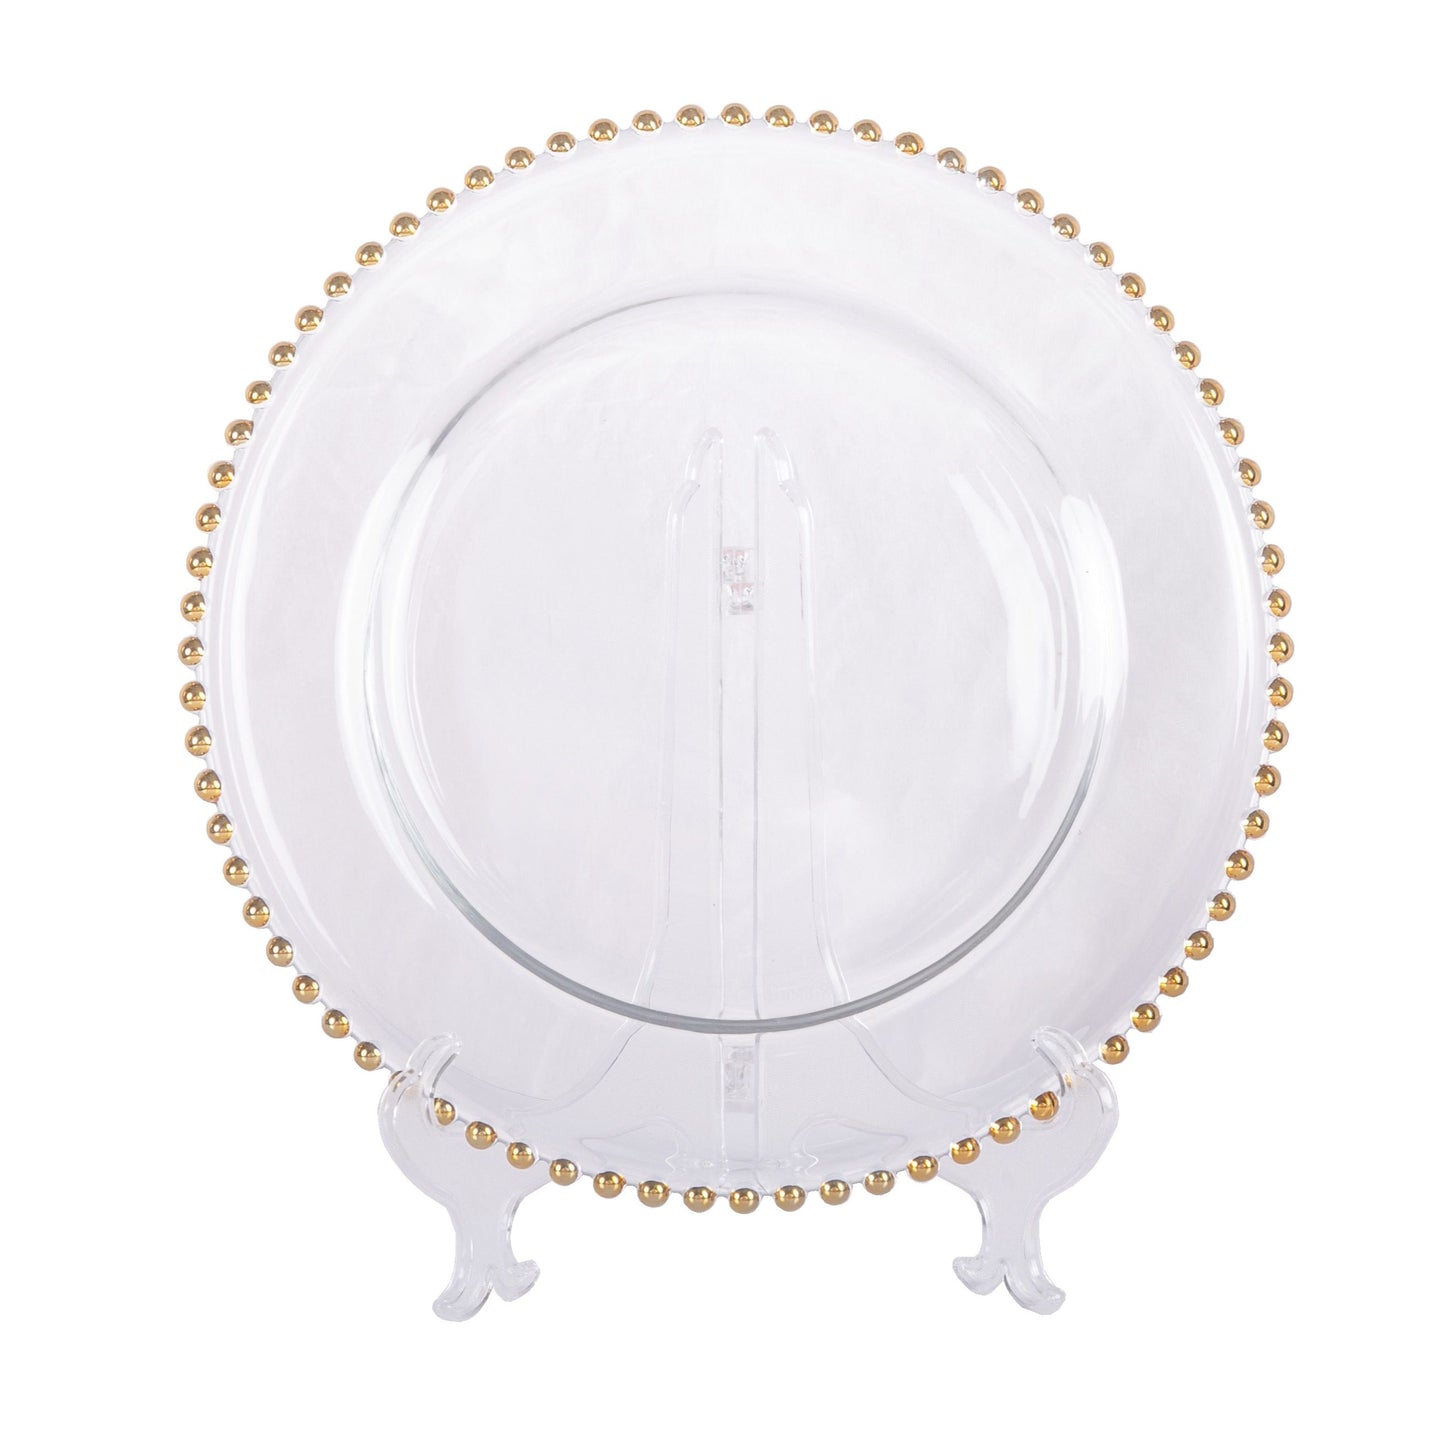 Gold Beads Charger Plate